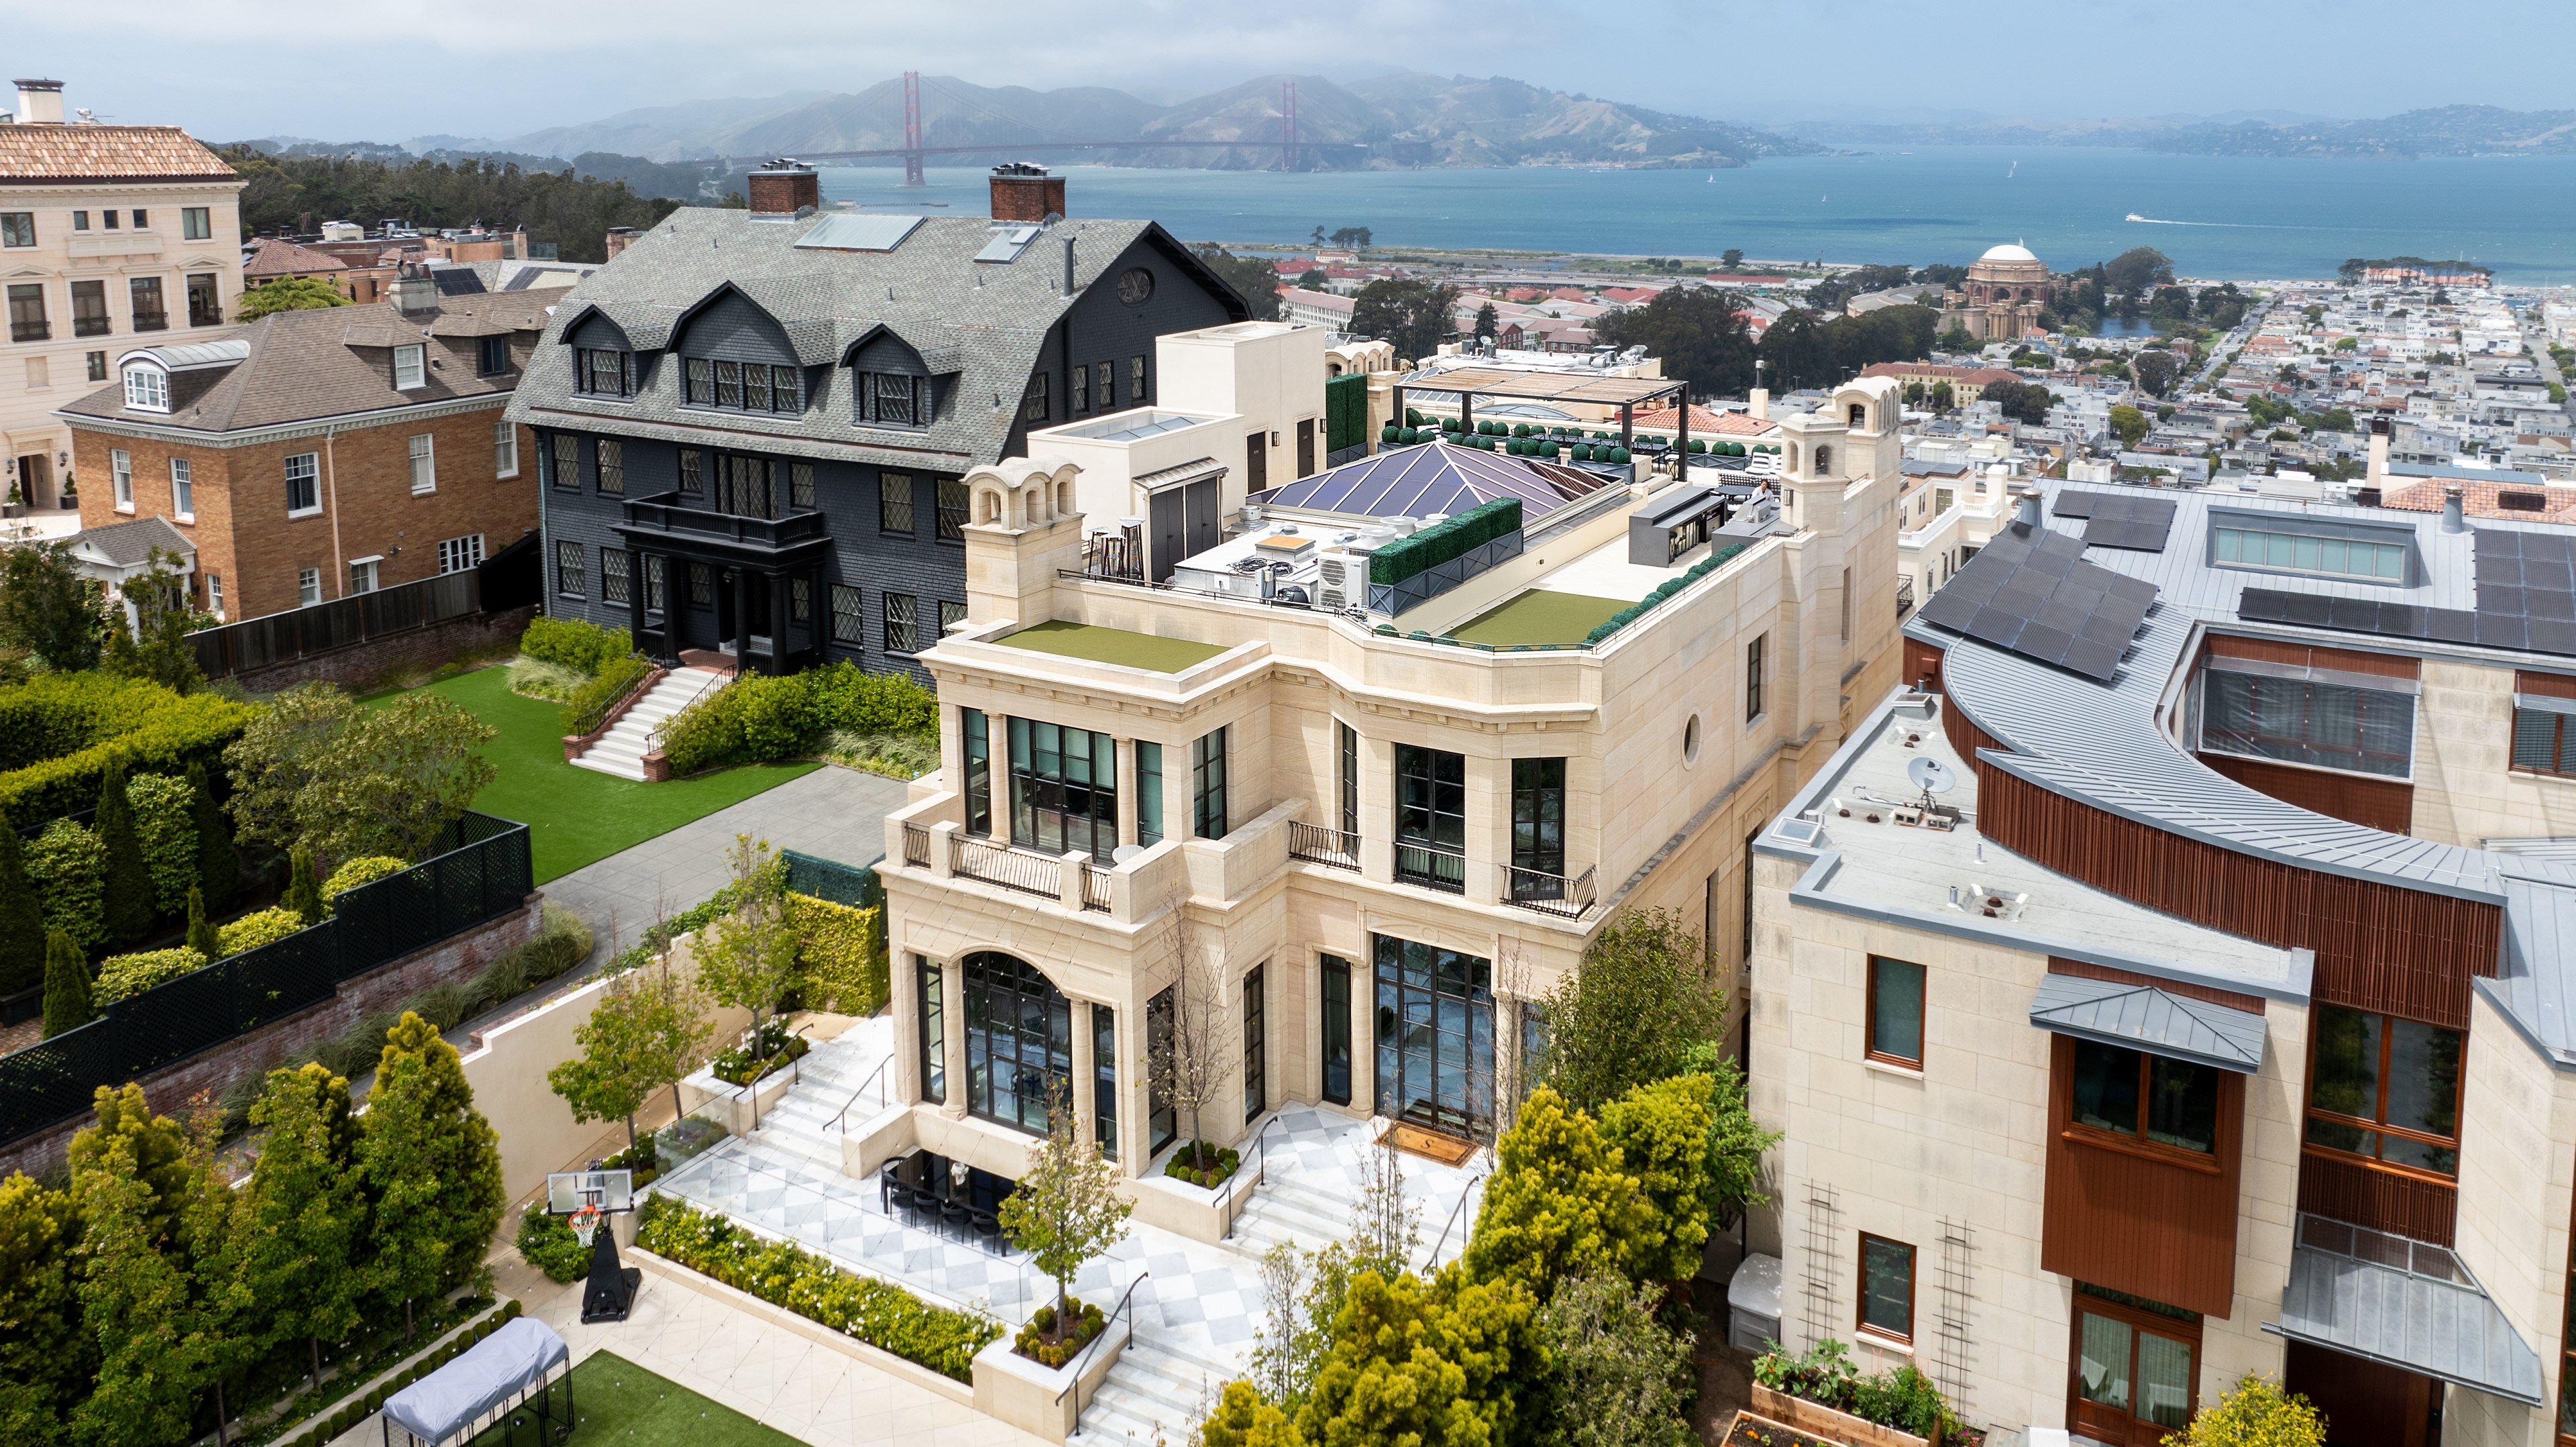 A luxurious neighborhood with elegant houses and manicured gardens. In the background, there's a scenic view of a bay with hills and a red bridge.